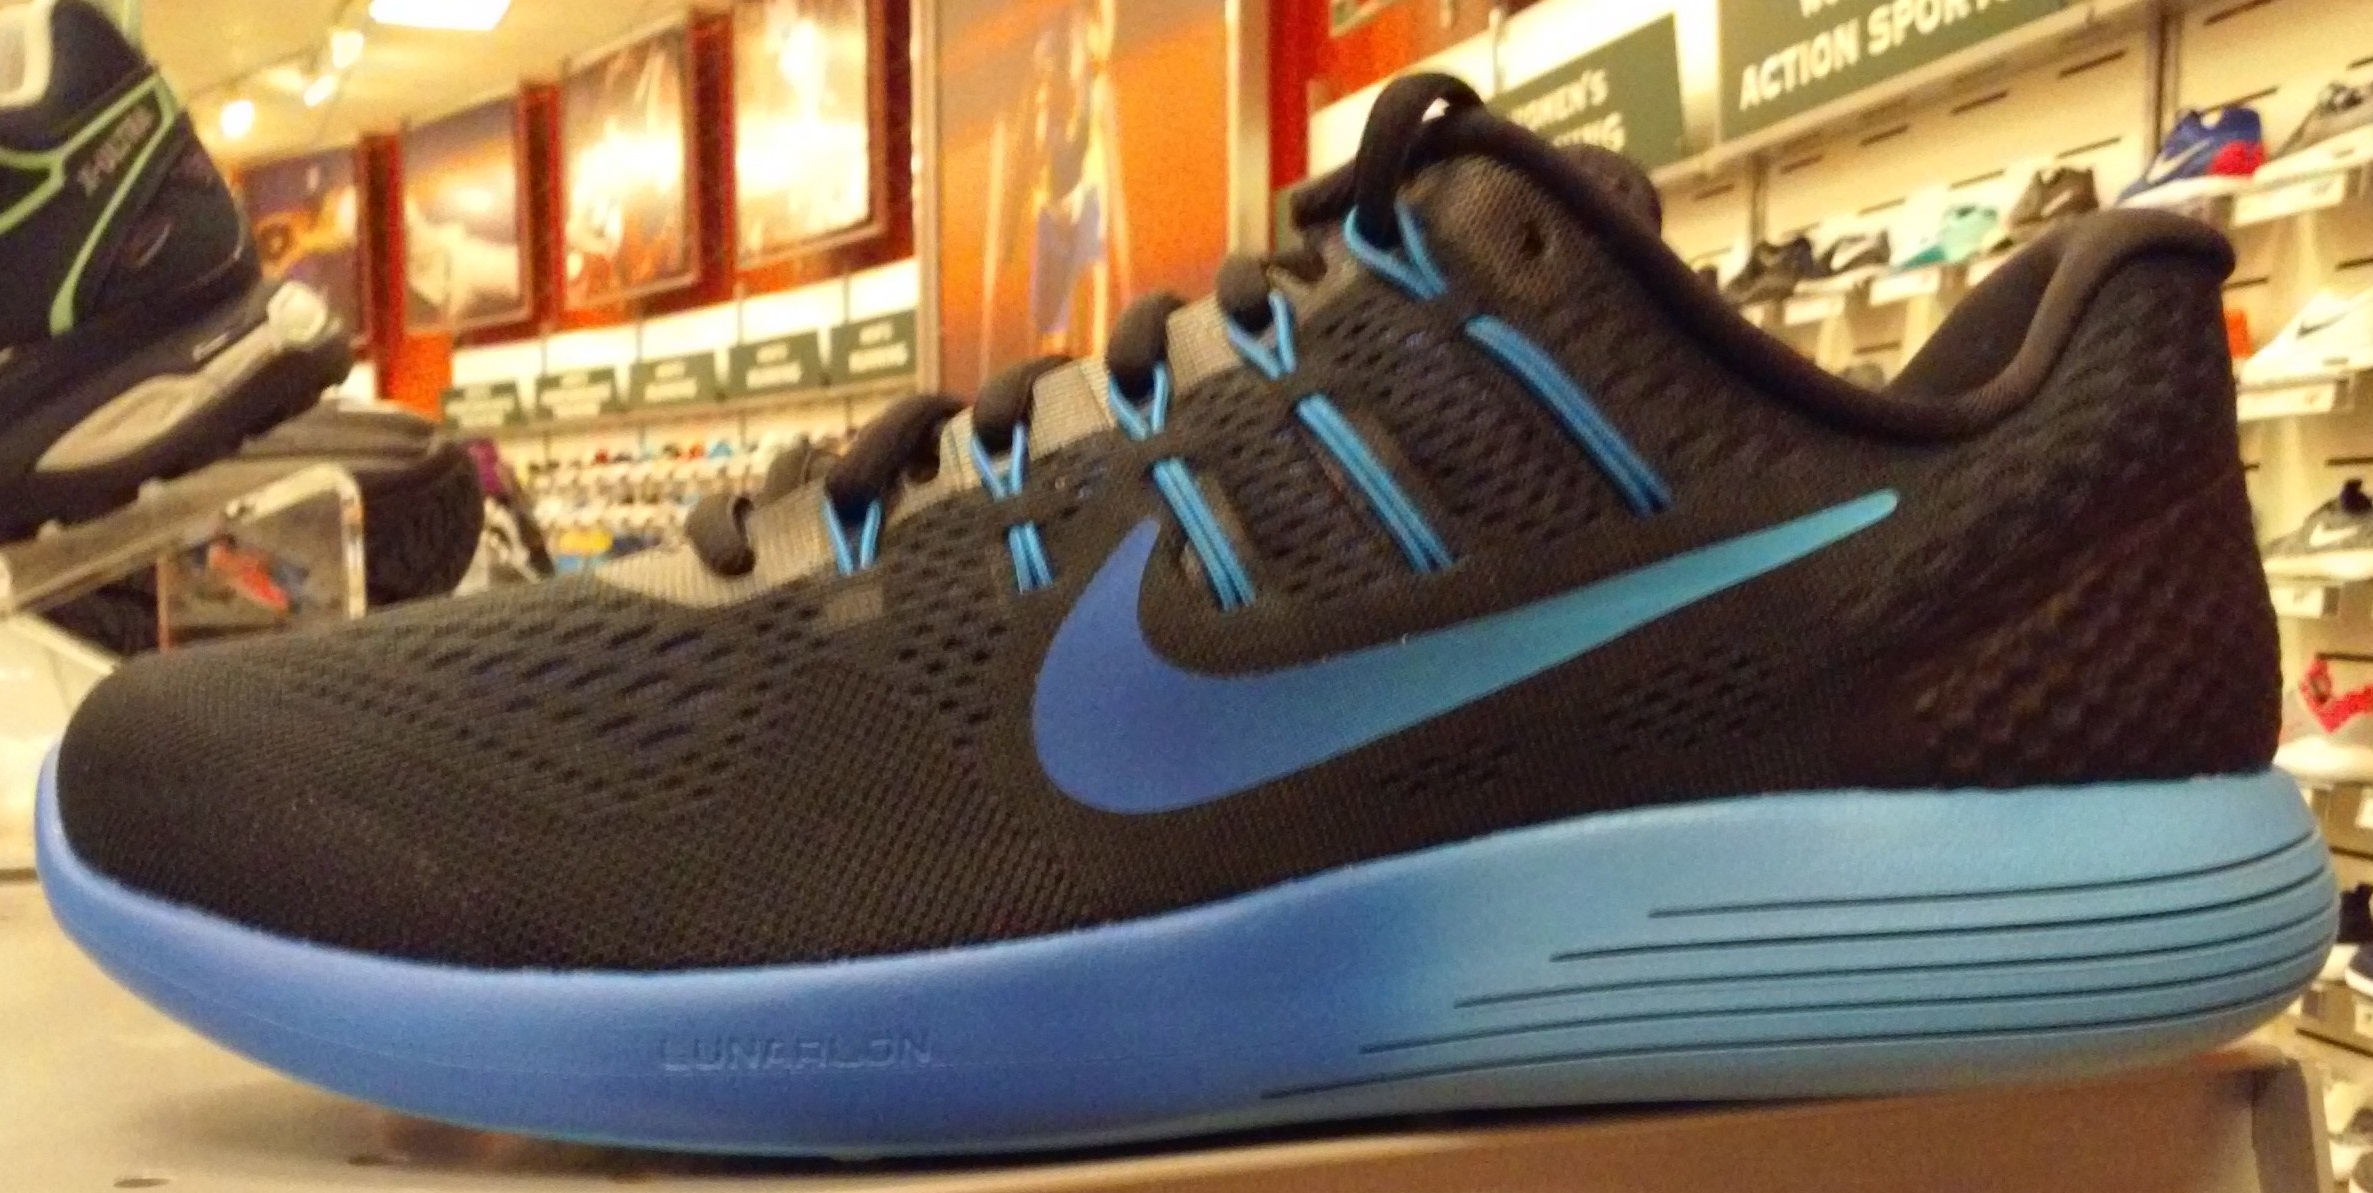 nike lunarglide 8 review